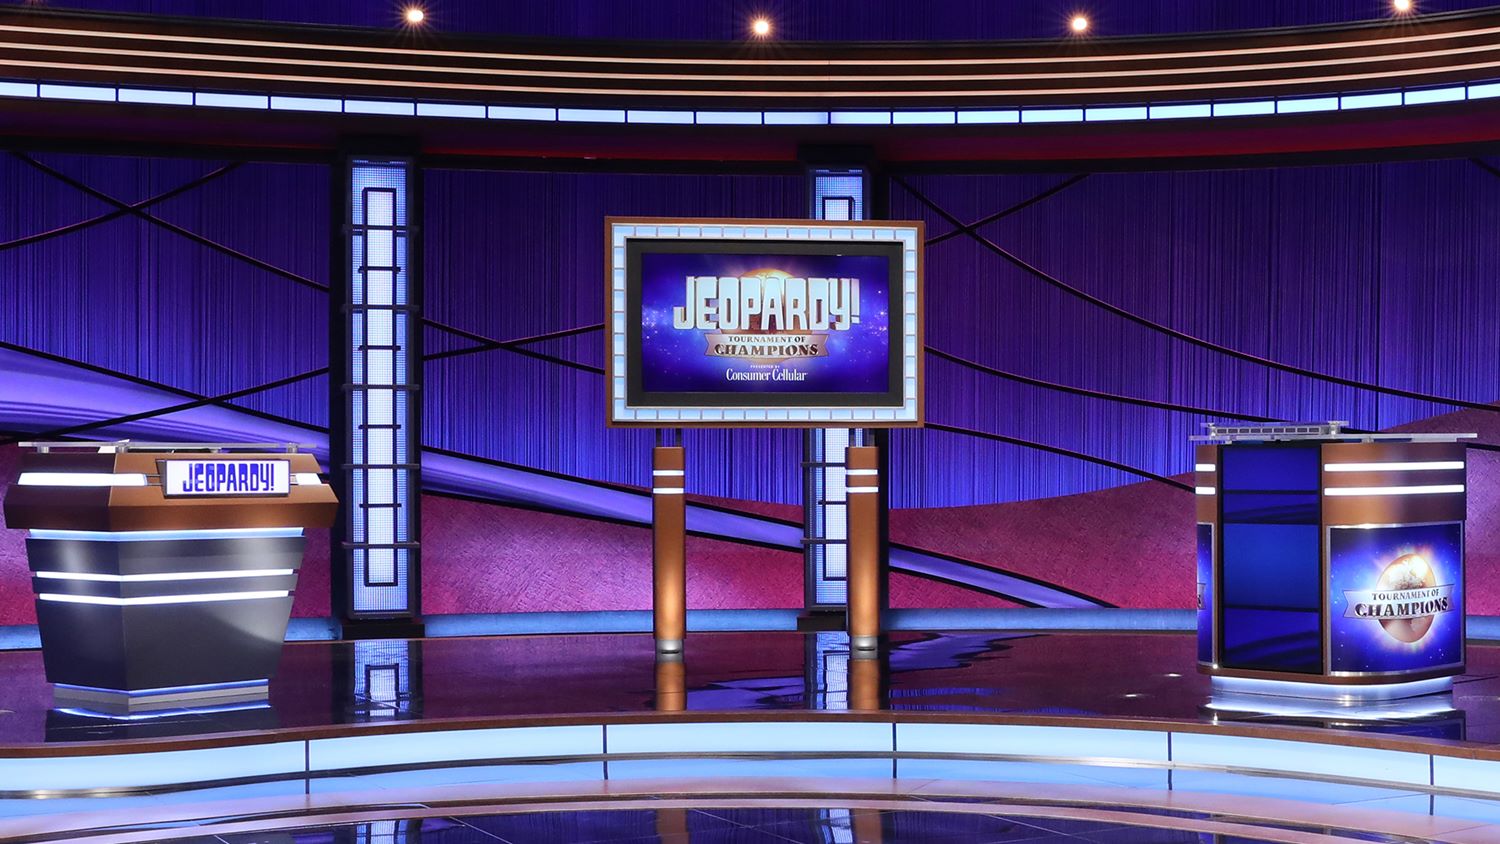 How To Watch Jeopardy Tournament Of Champions